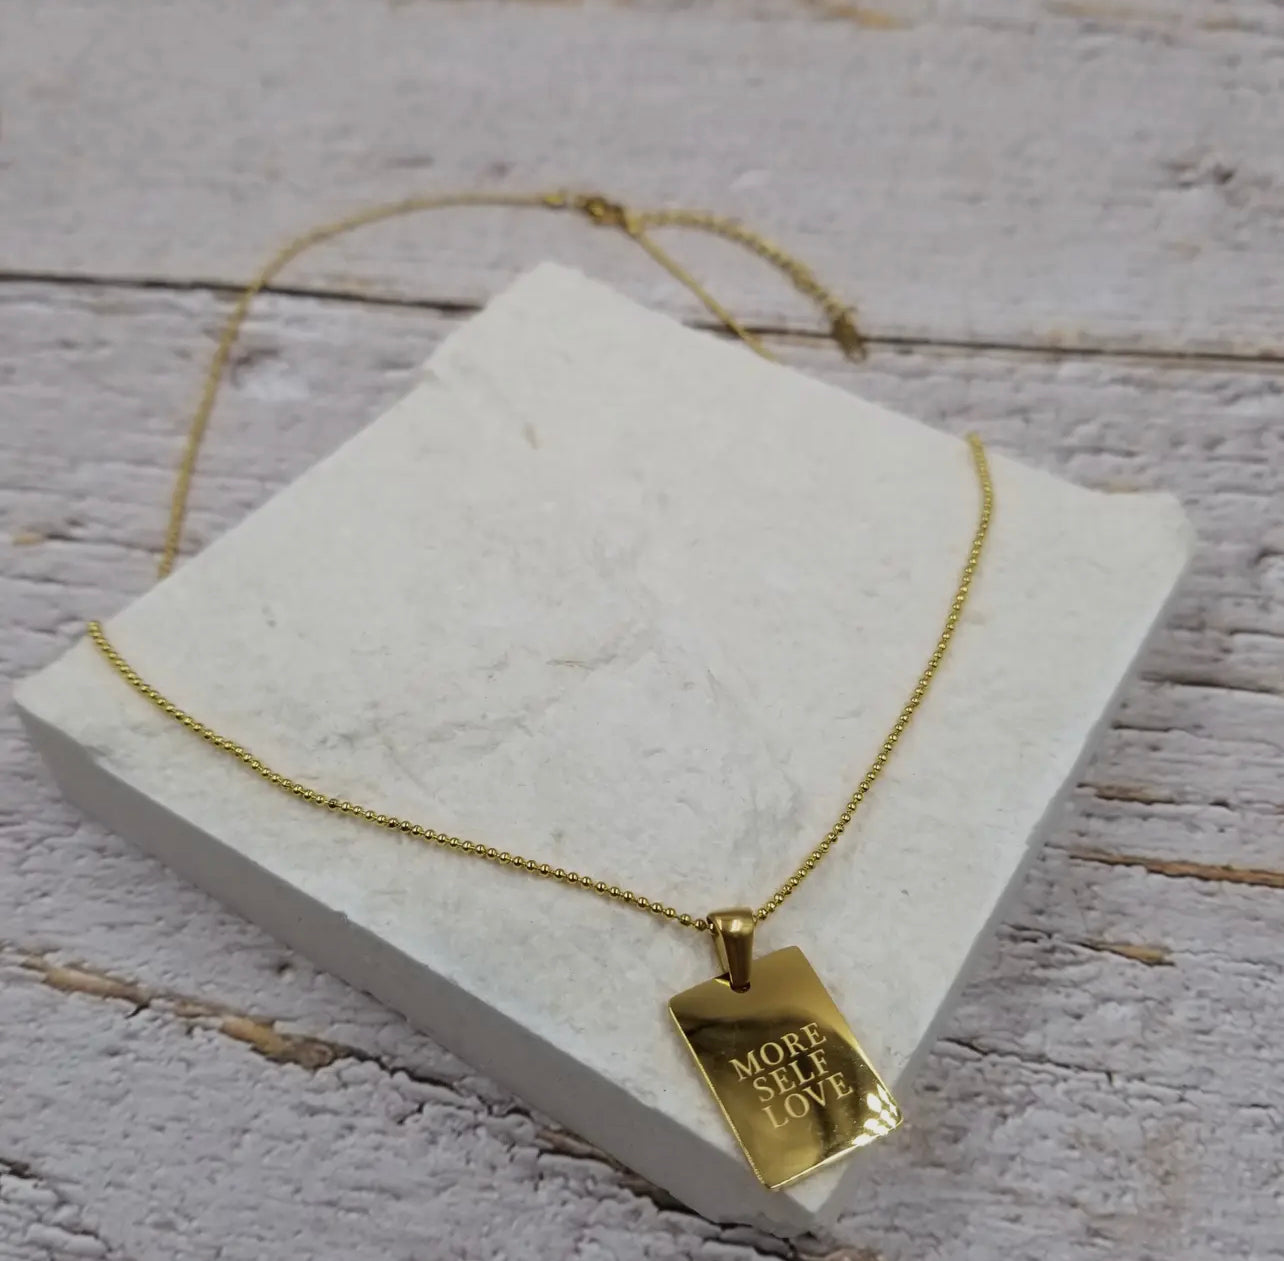 "More Self Love" 18K Gold Engraved Pendant Necklace